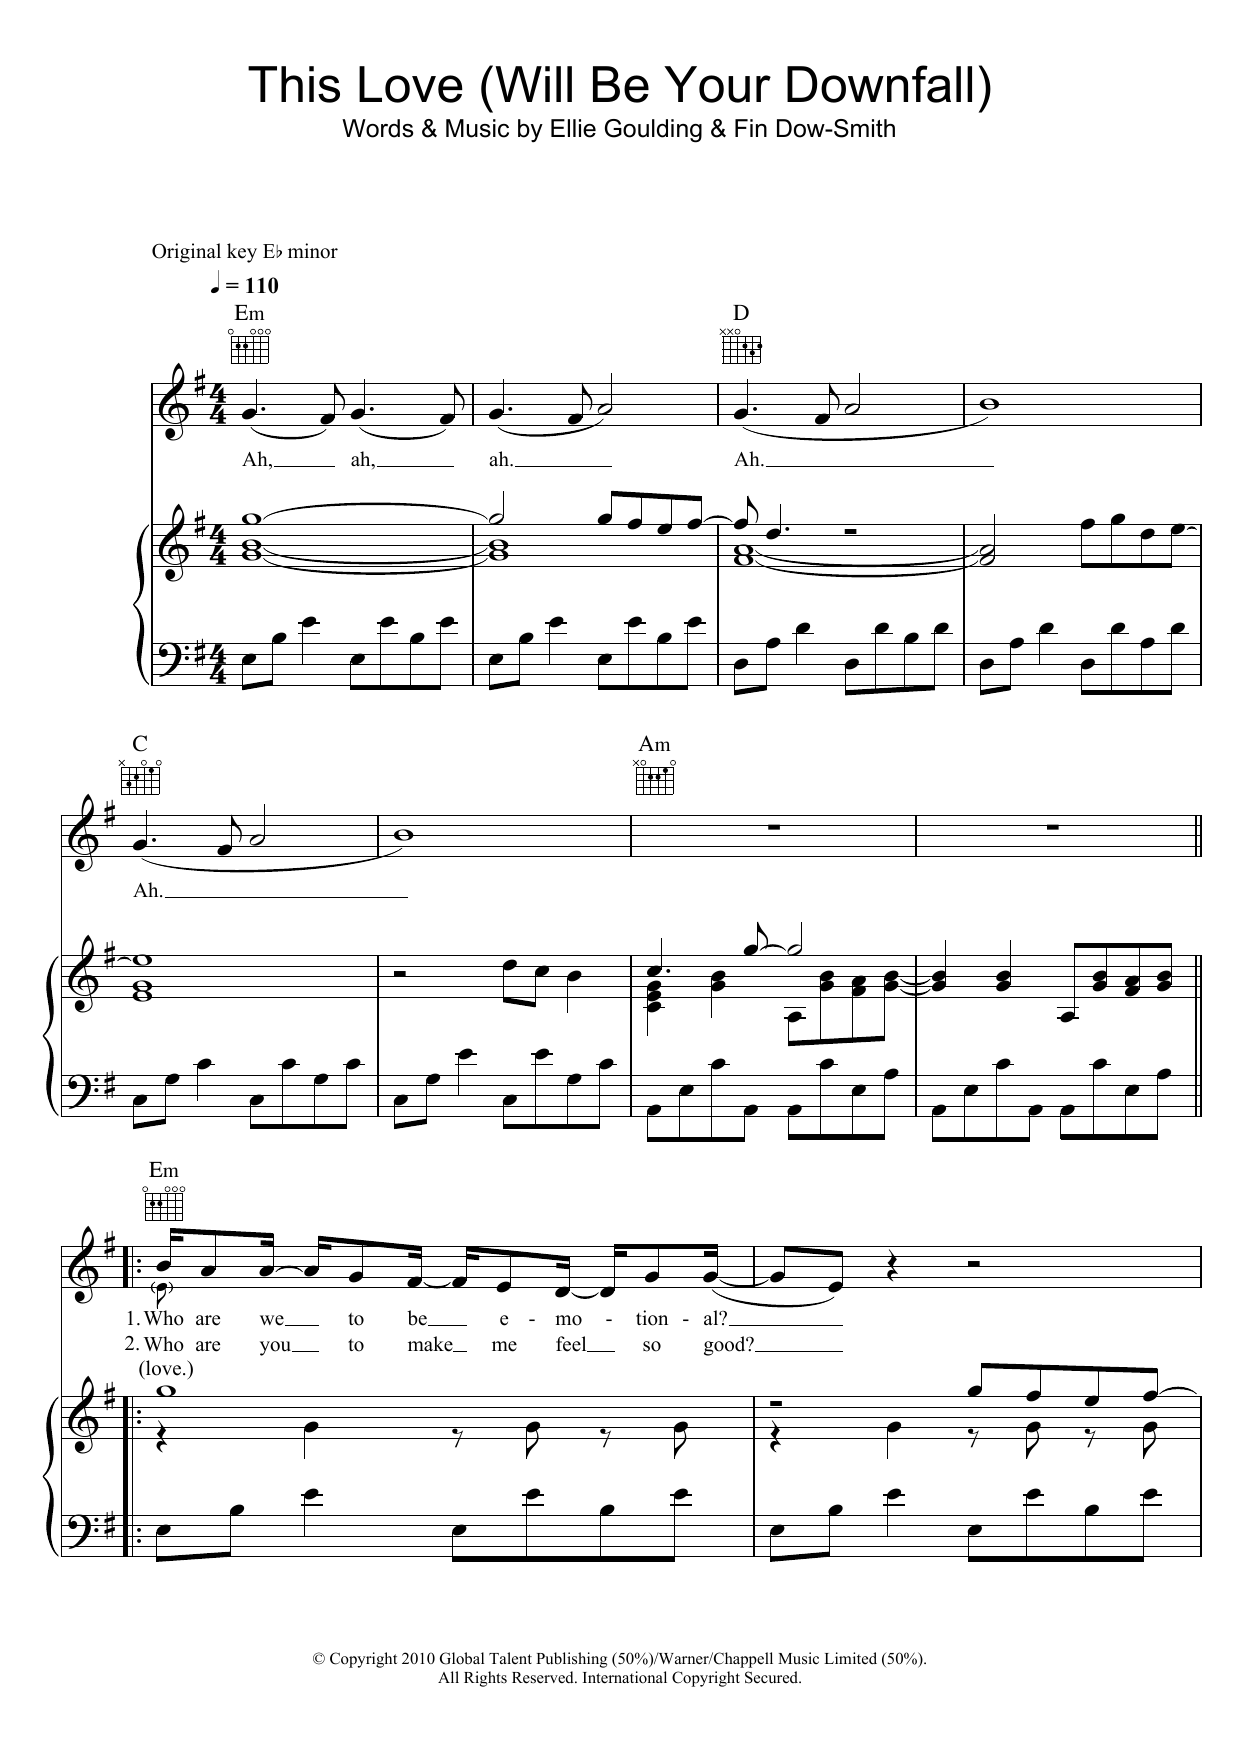 Download Ellie Goulding This Love (Will Be Your Downfall) Sheet Music